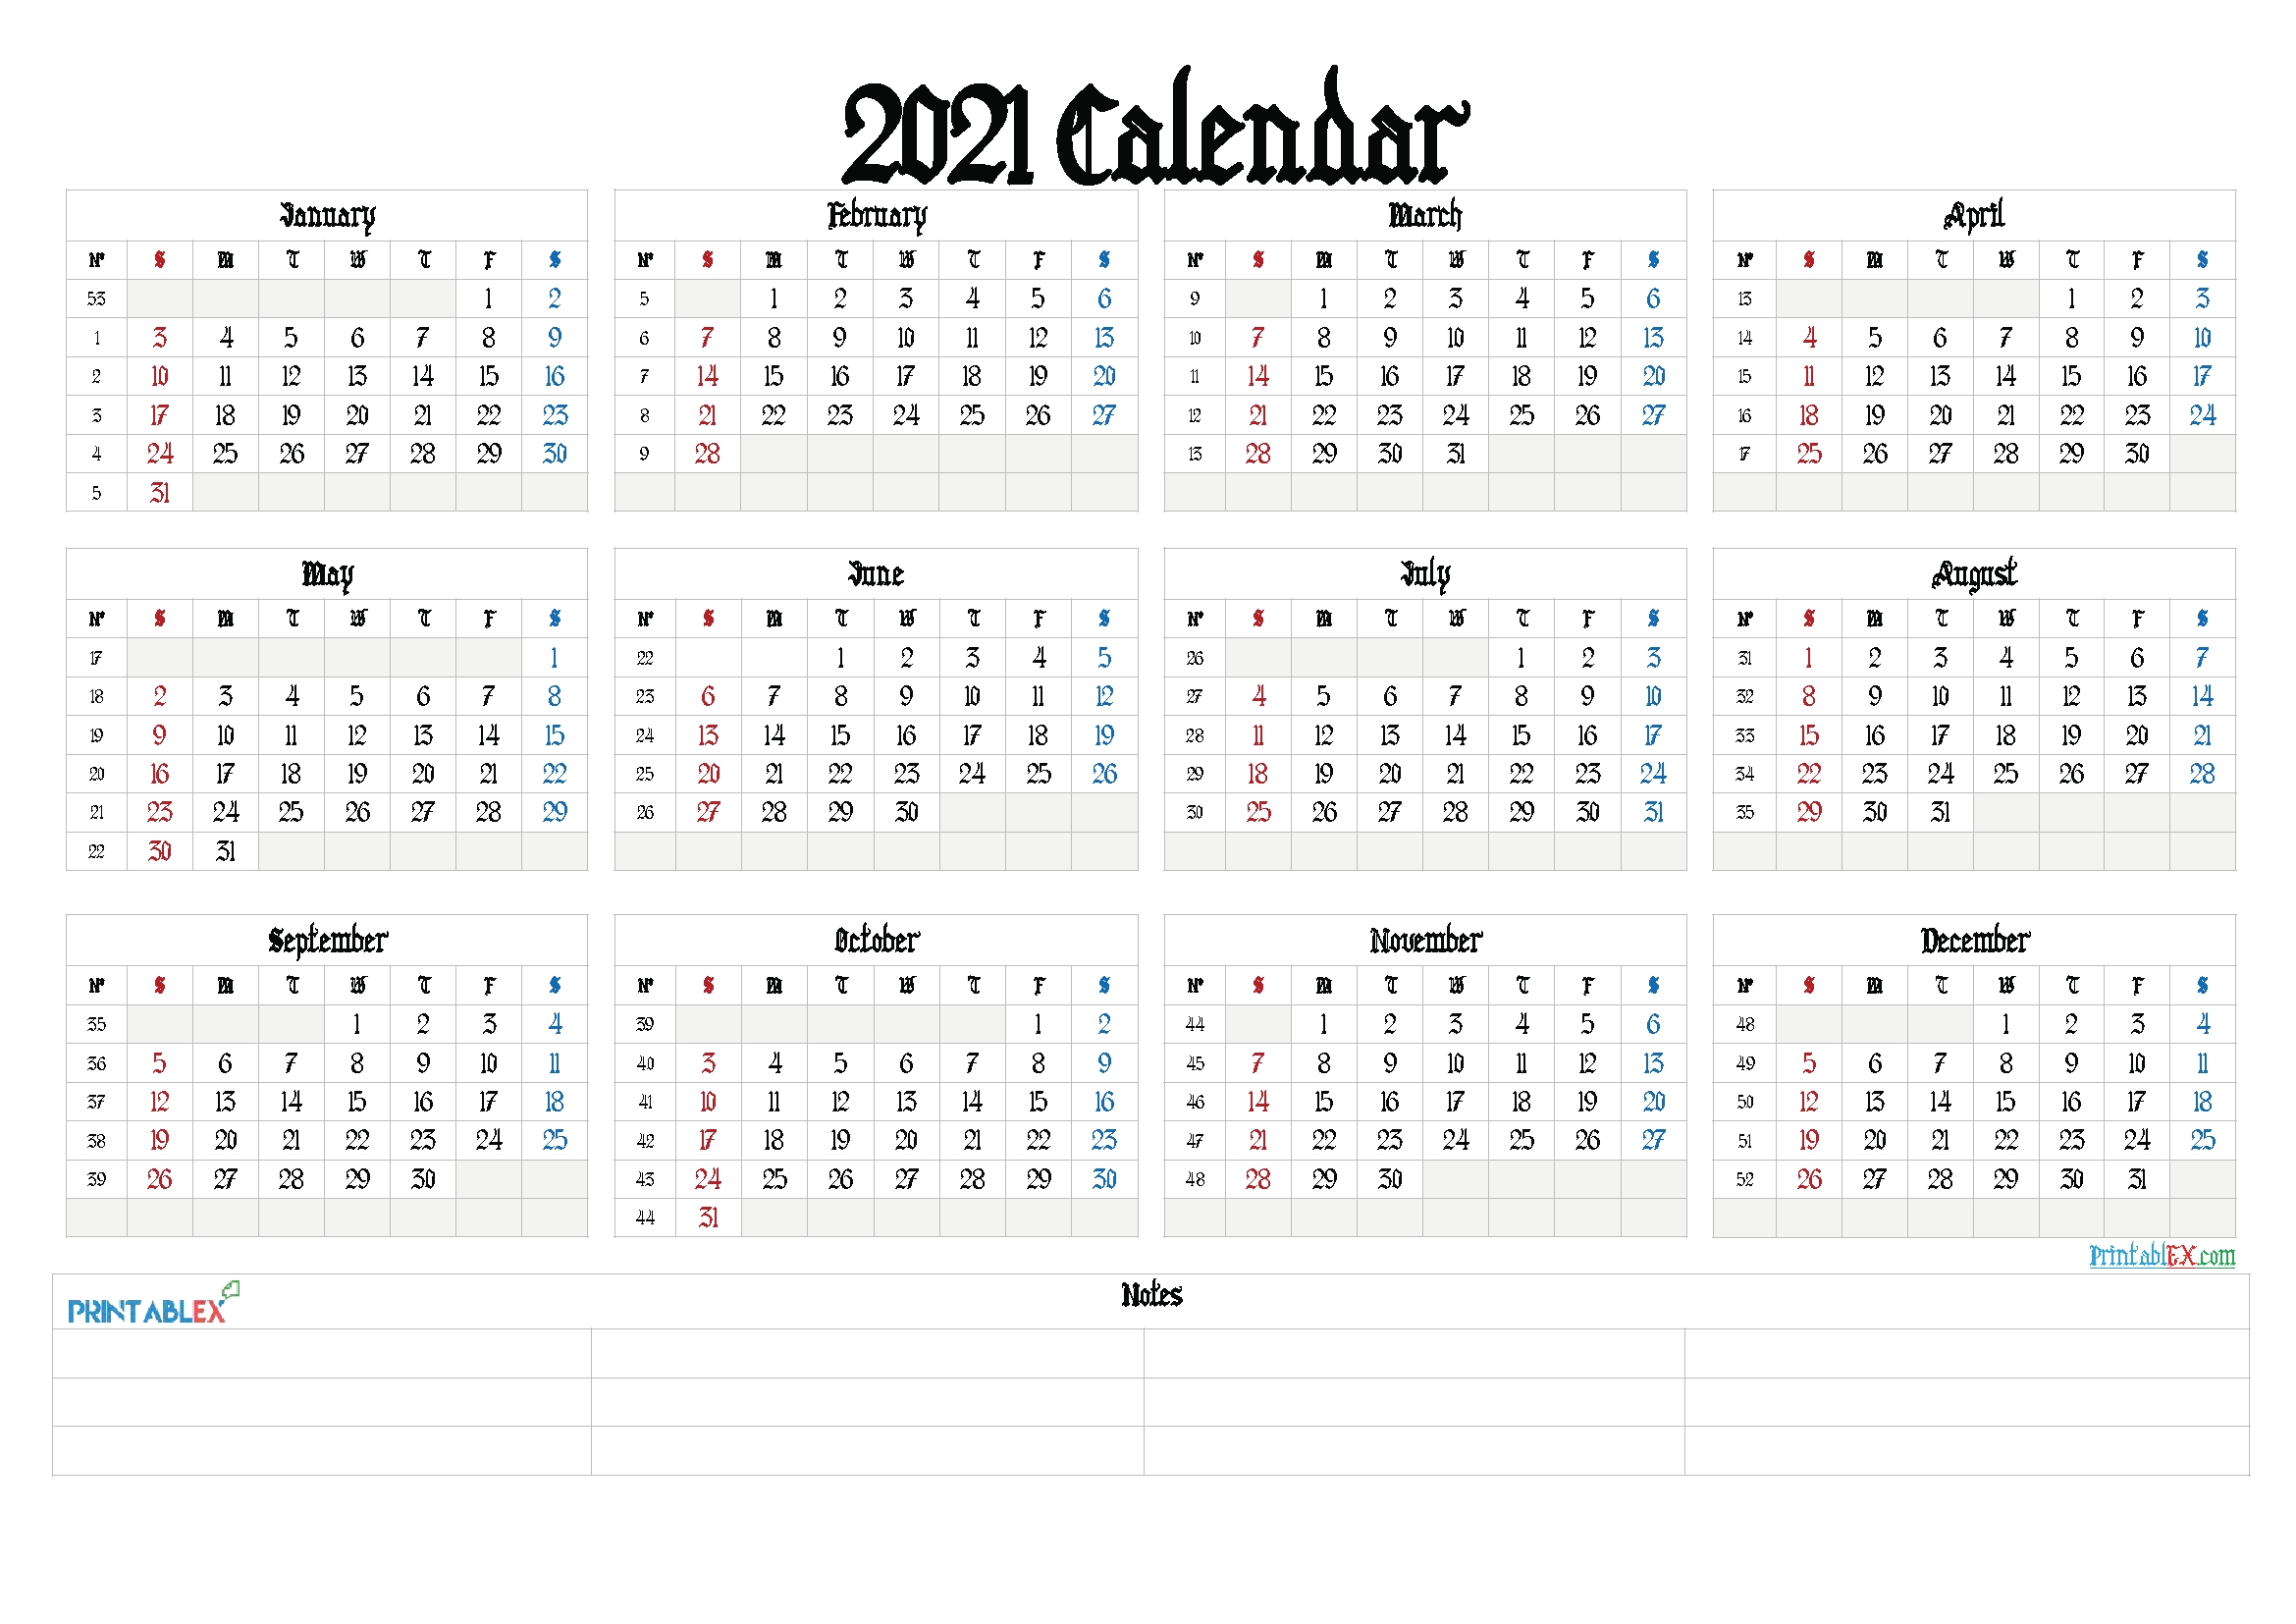 Collect 2021 Calendar To Writ On